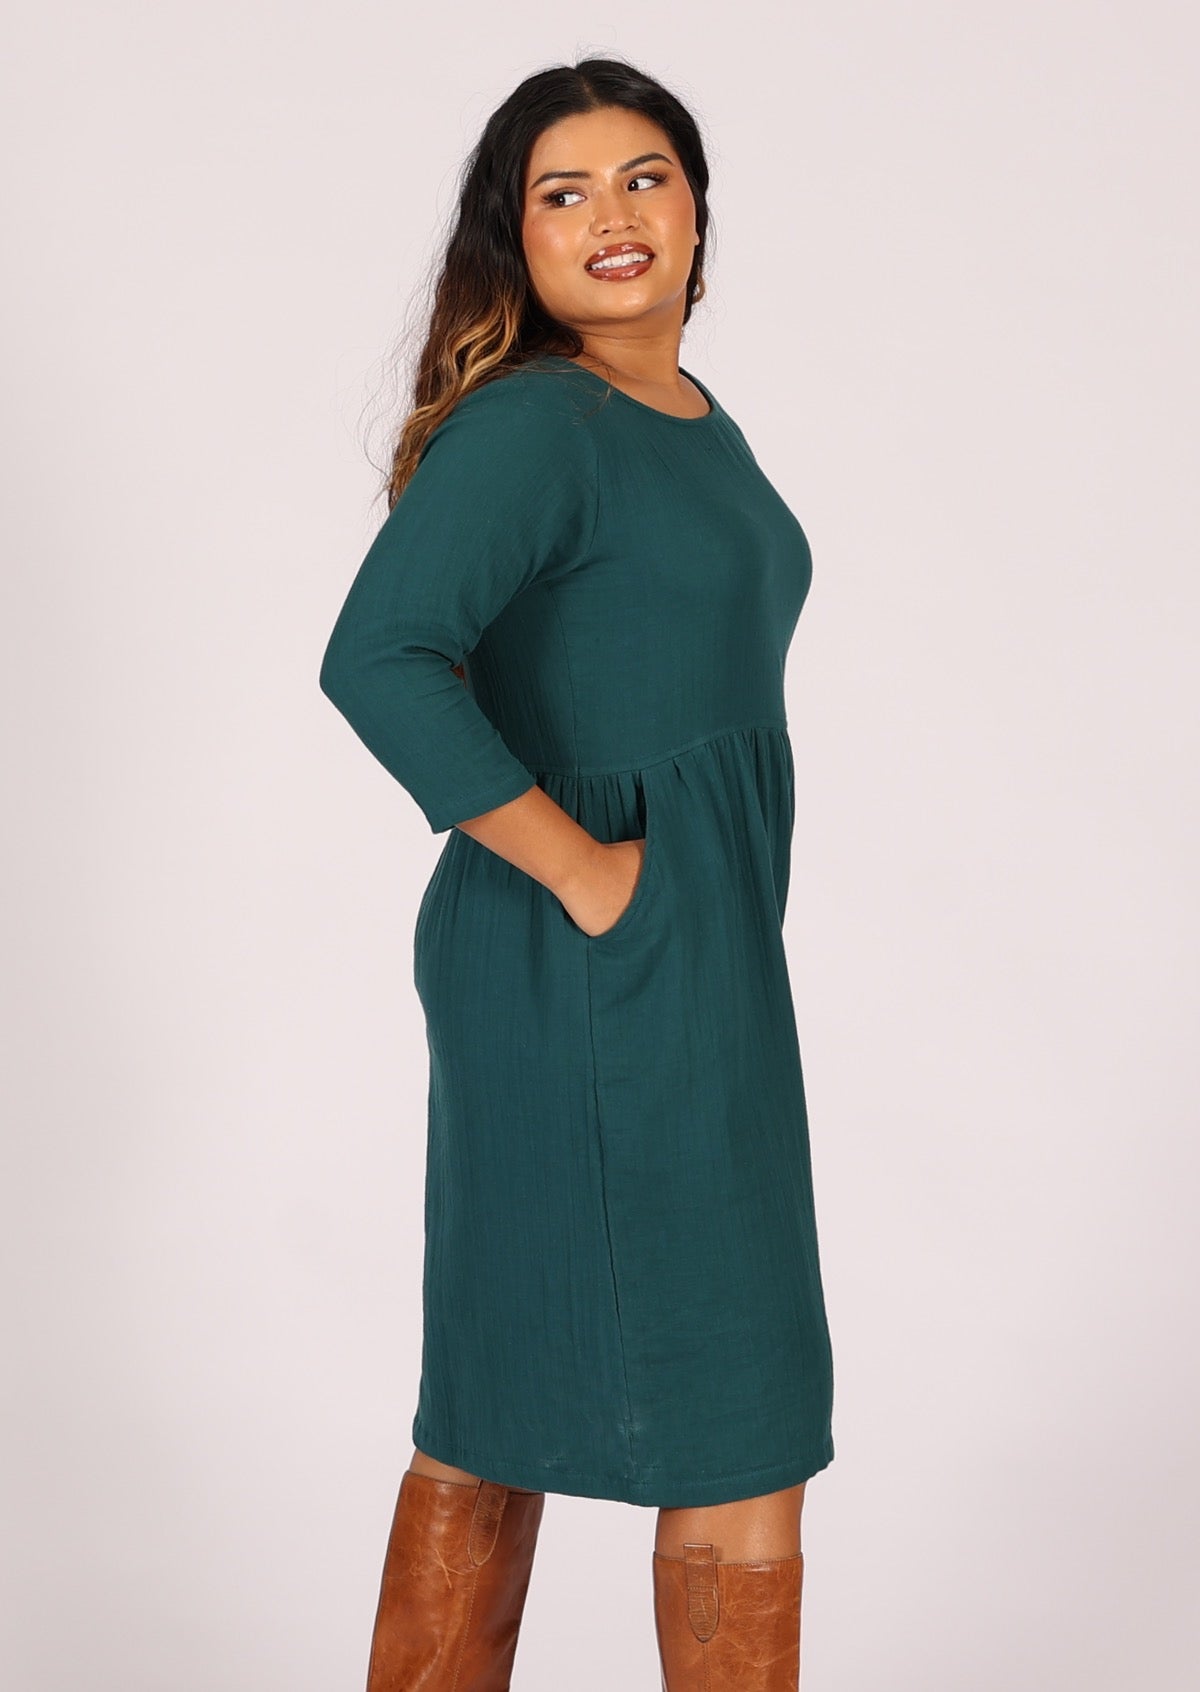 Over the knee lightweight cotton dress with round neckline and pockets